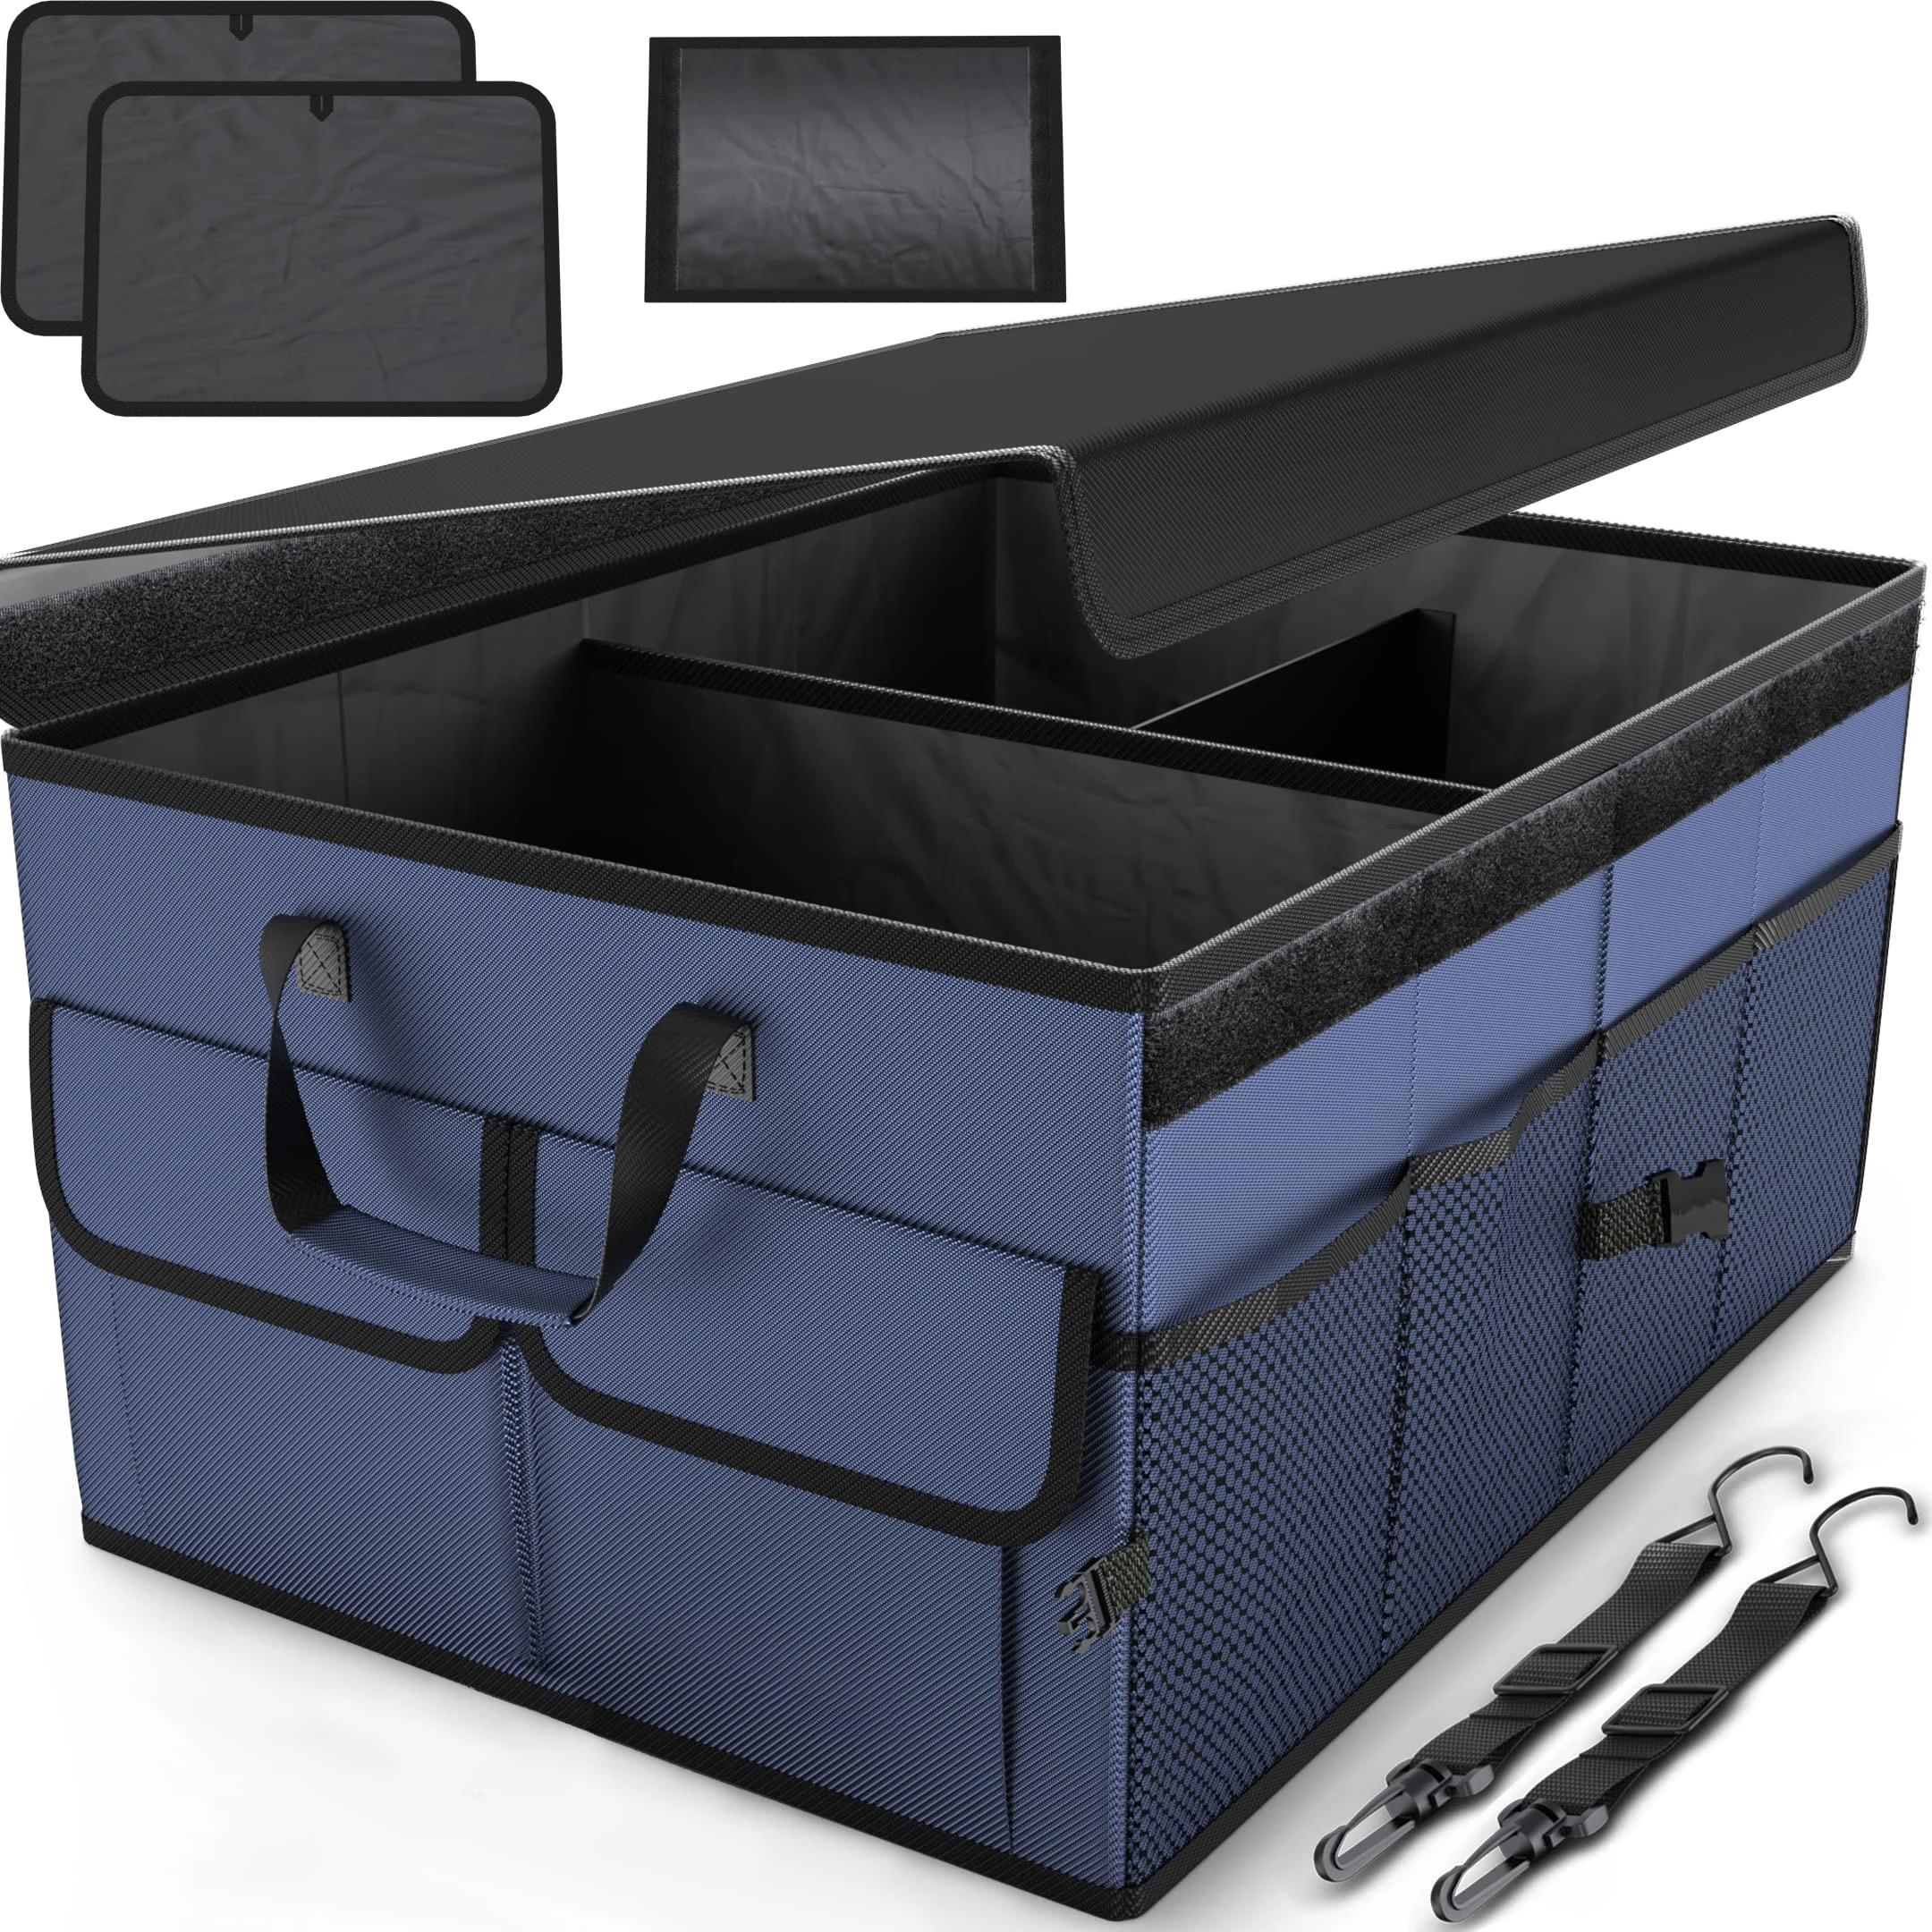 

Factory Custom Collapsible Multi Compartment 600d polyester SUV Trunk Organizer car backseat organizer bag with pocket